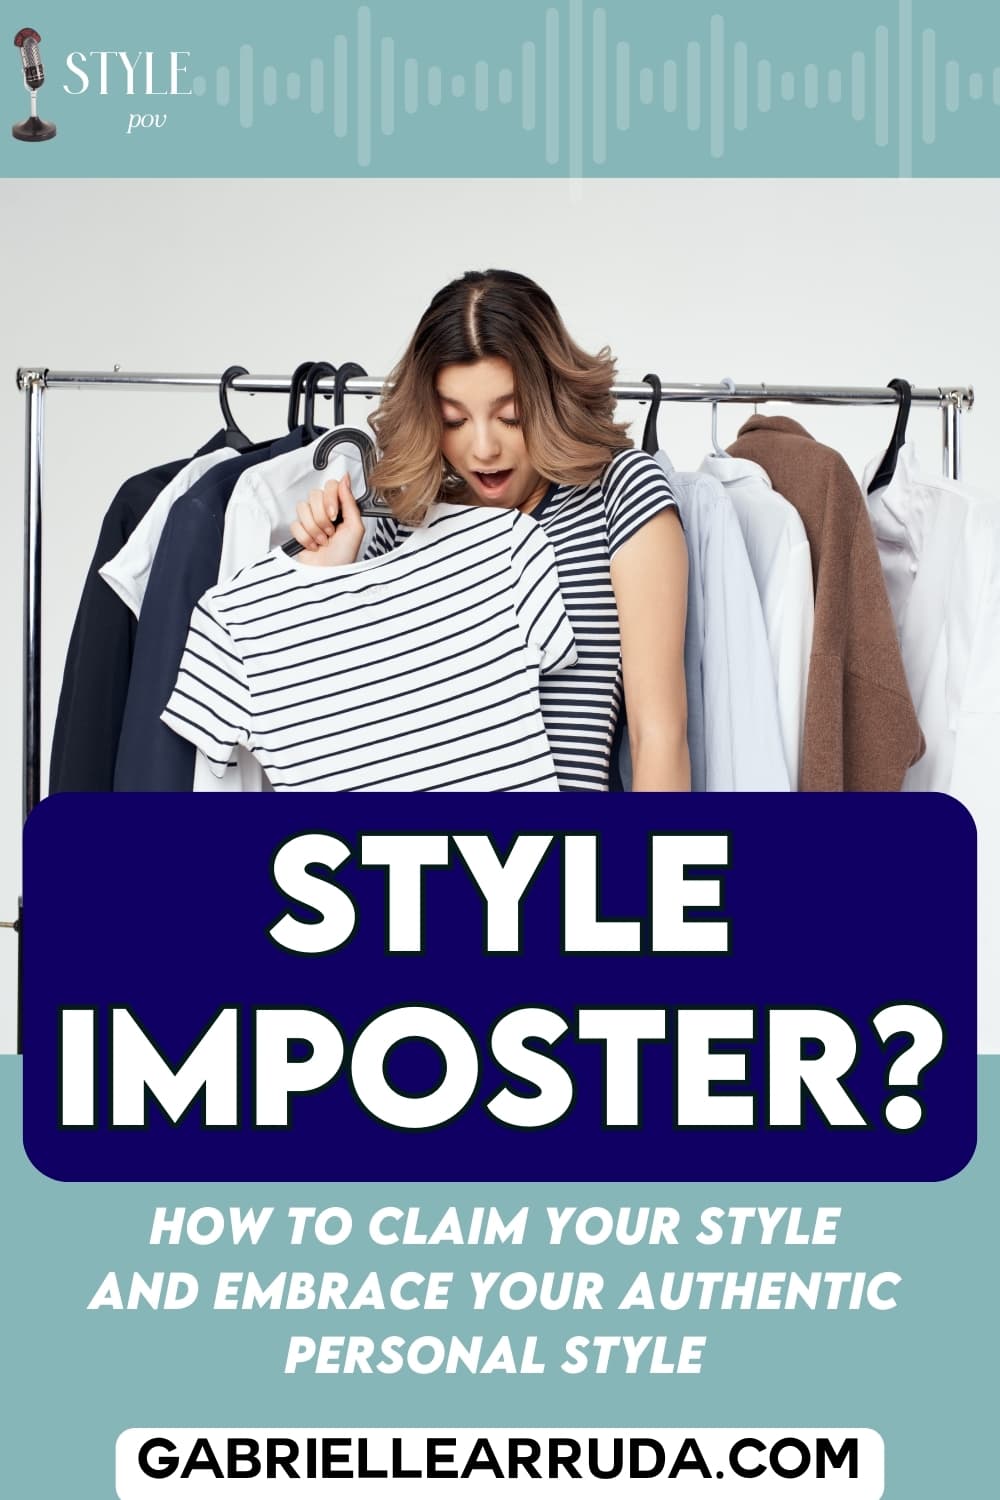 woman looking at clothes in shock with "style imposter text"